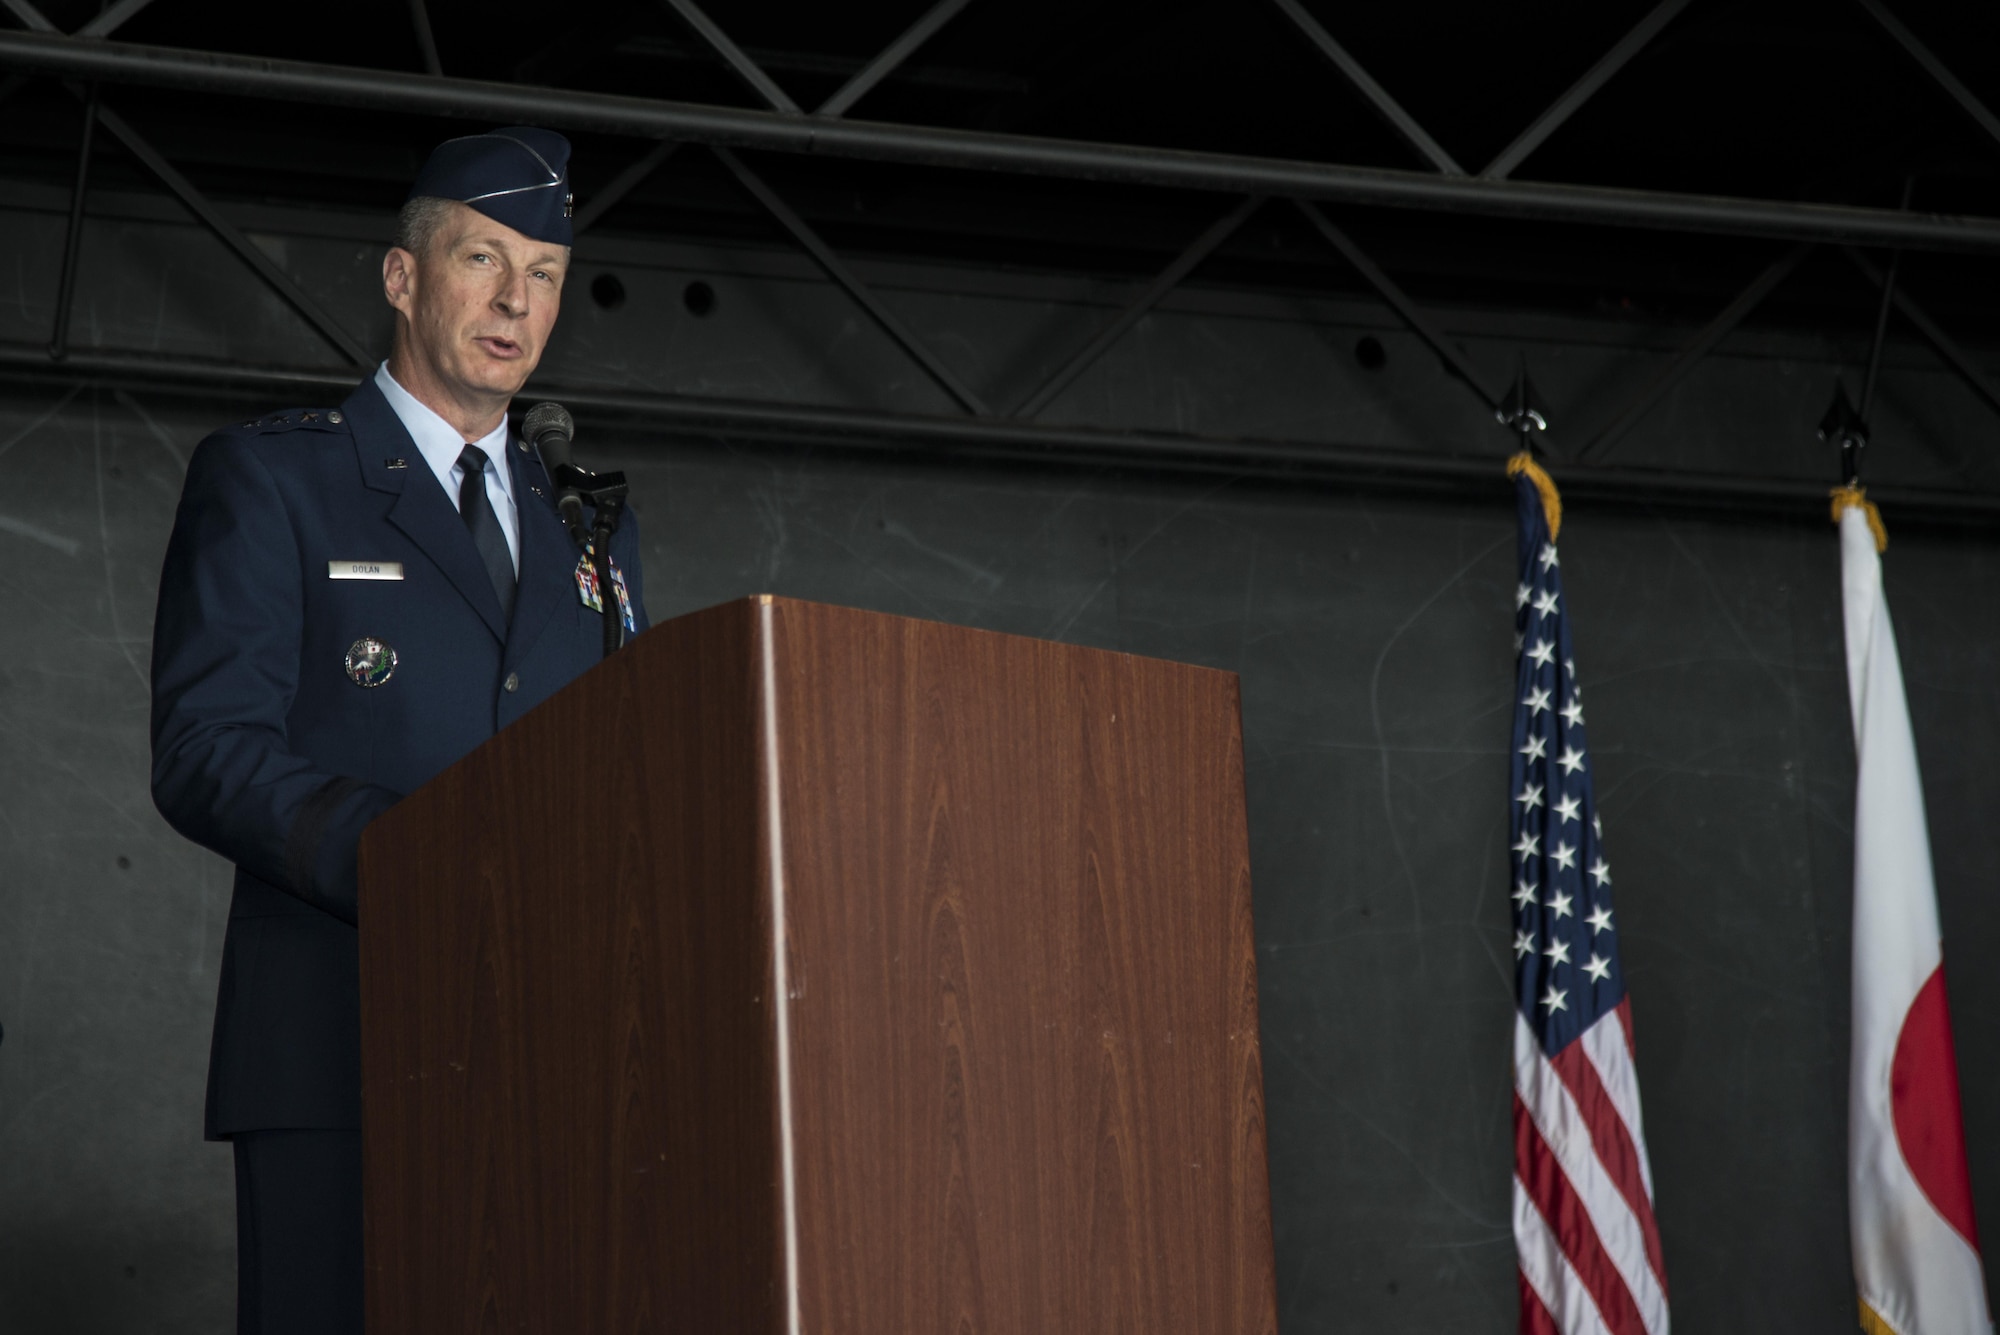 U.S. Air Force Lt. Gen. John Dolan, U.S. Forces, Japan and 5th Air Force commander, addresses Airmen during the 35th Fighter Wing change of command ceremony at Misawa Air Base, Japan, July 7, 2016. Dolan presided over the ceremony, in which Col. Timothy Sundvall relinquished command to Col. R. Scott Jobe. (U.S. Air Force photo by Senior Airman Brittany A. Chase)